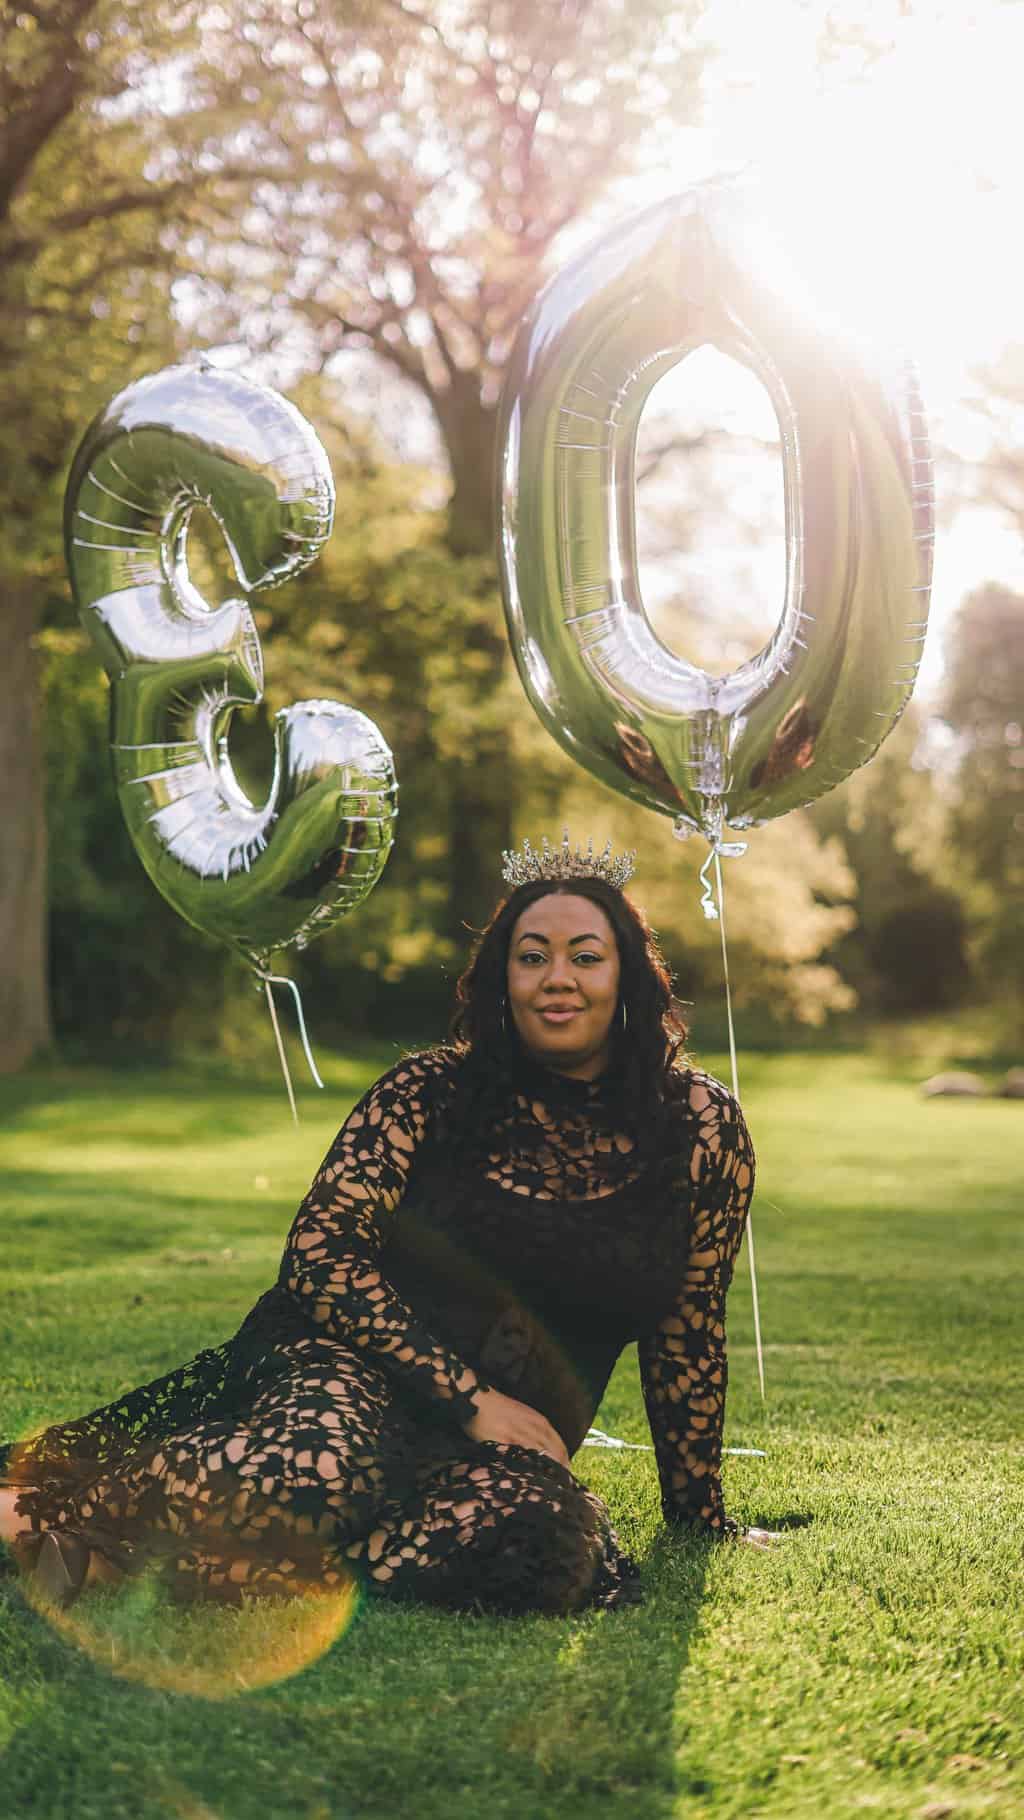 Free Black woman with balloons in shape of number 30 Stock Photo